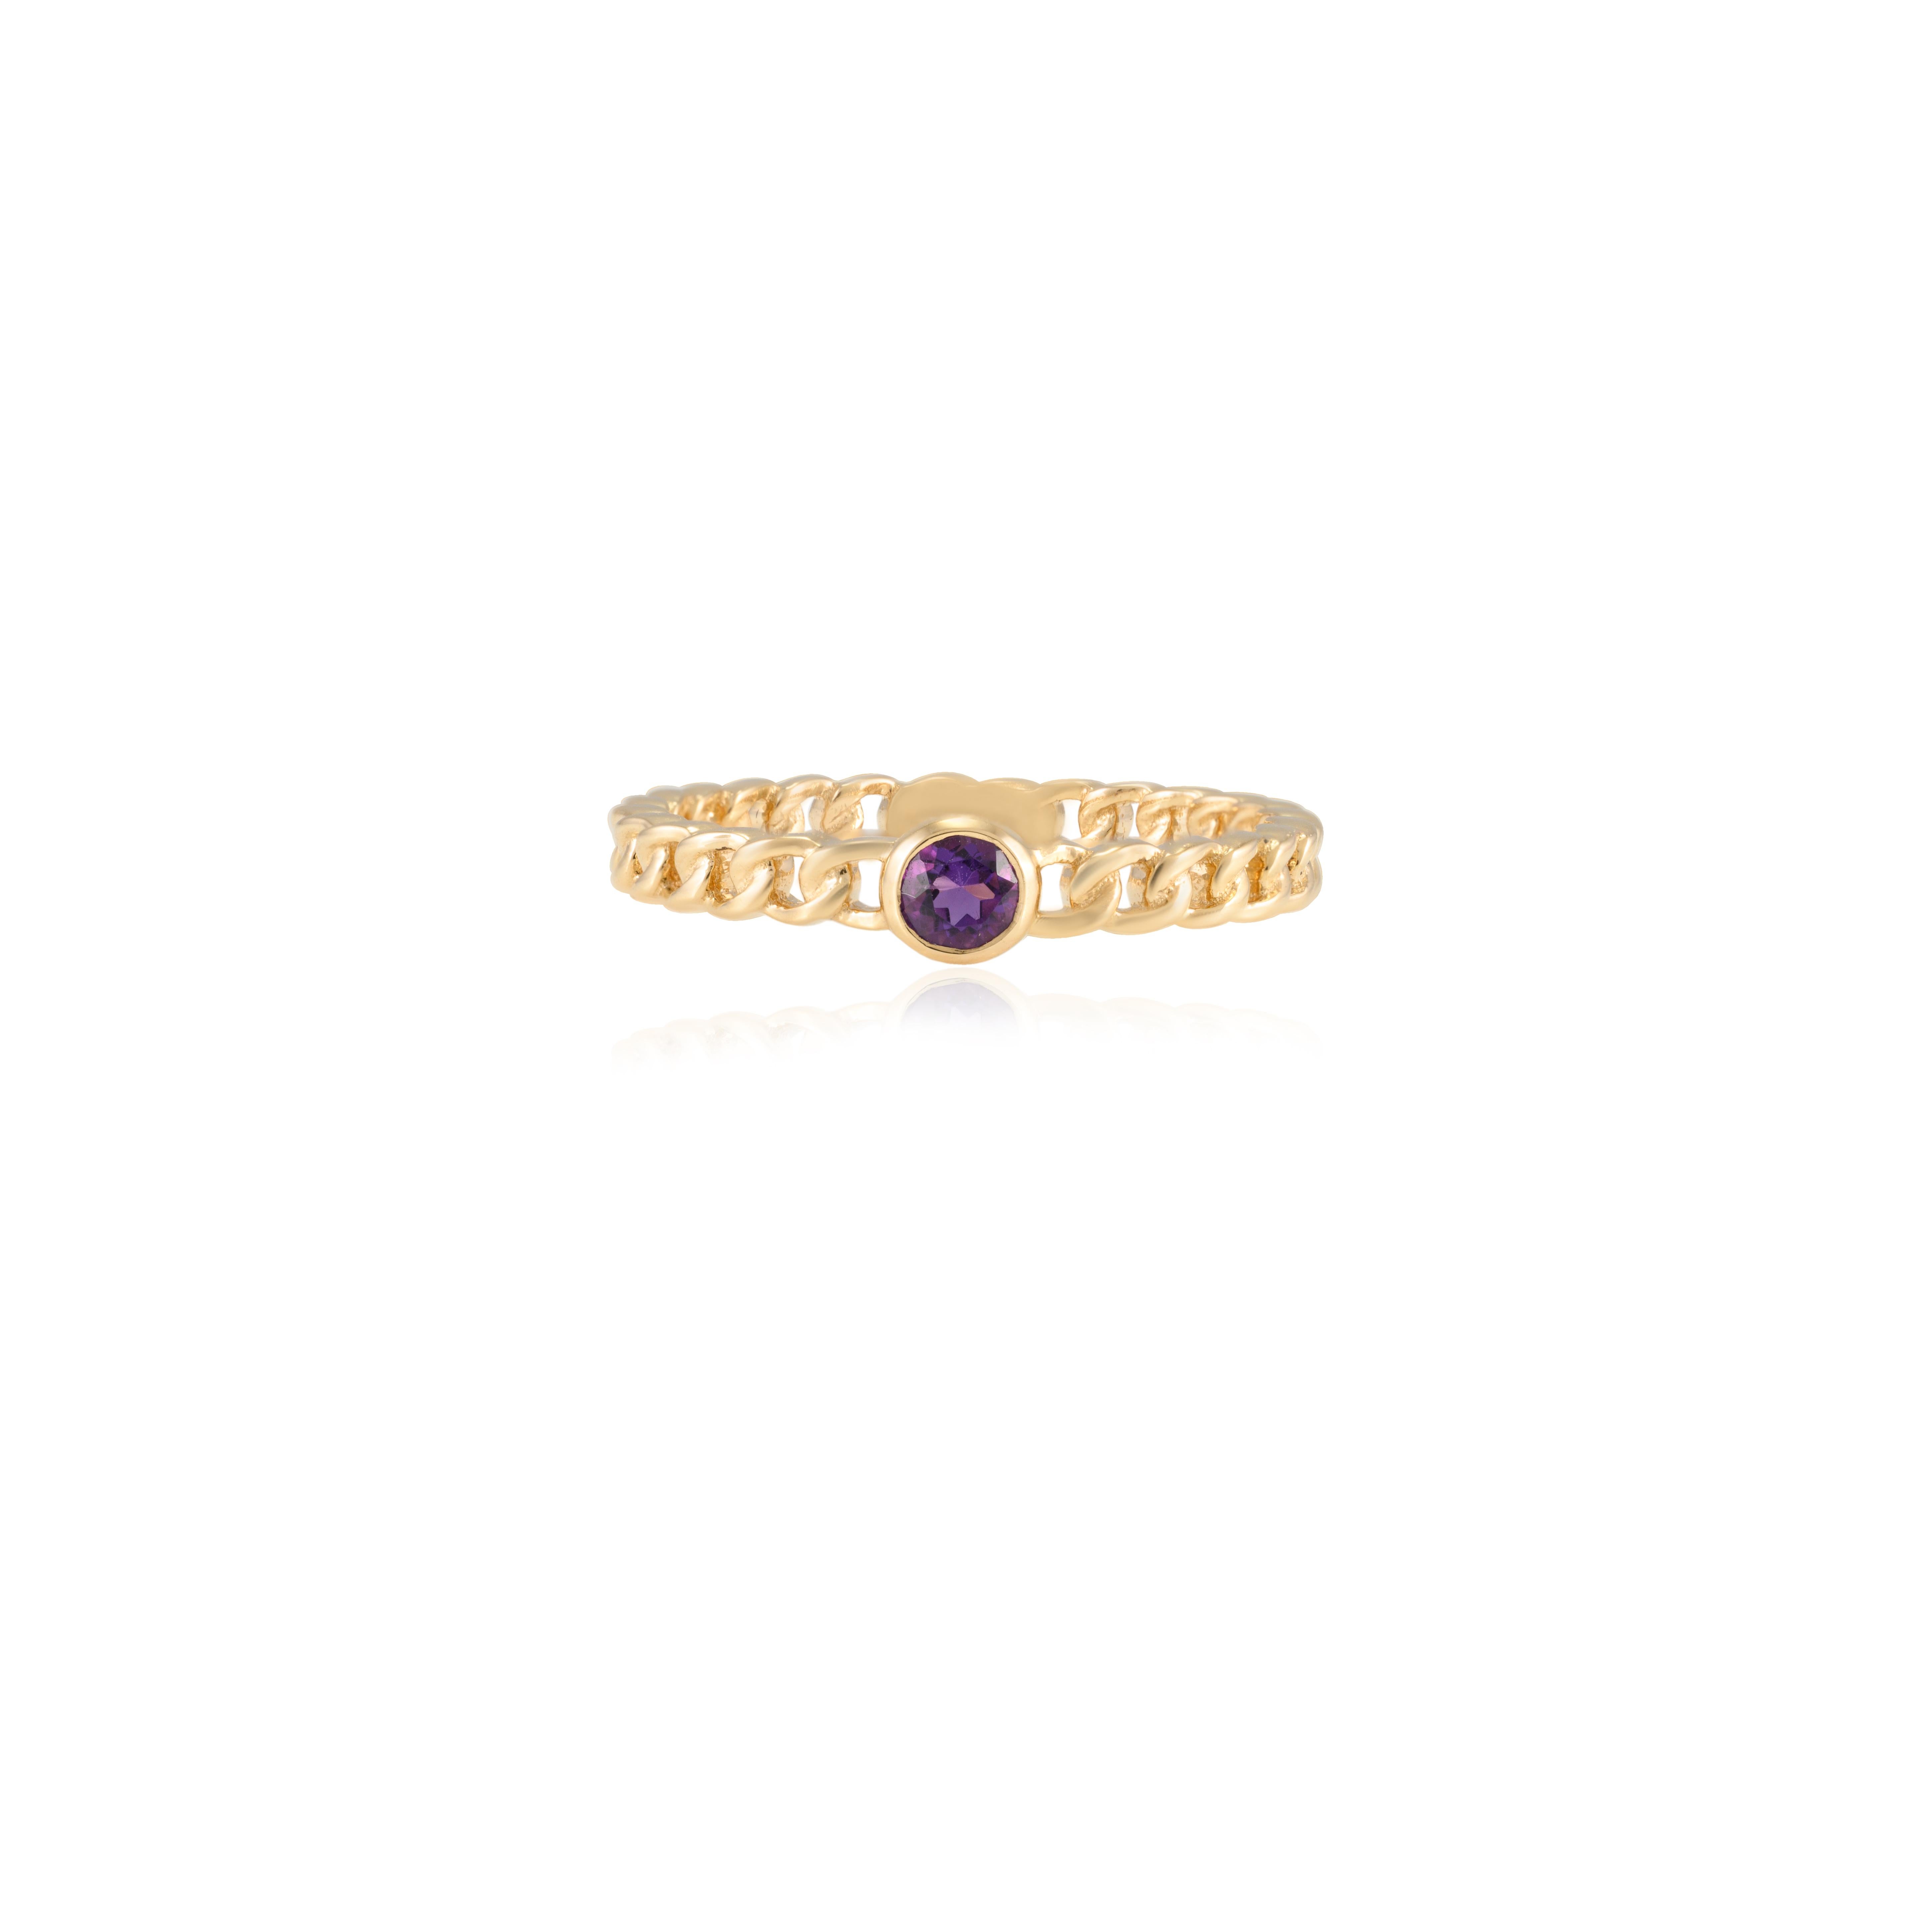 For Sale:  Dainty Round Amethyst Everyday Chain Ring Handcrafted in 14k Solid Yellow Gold 3